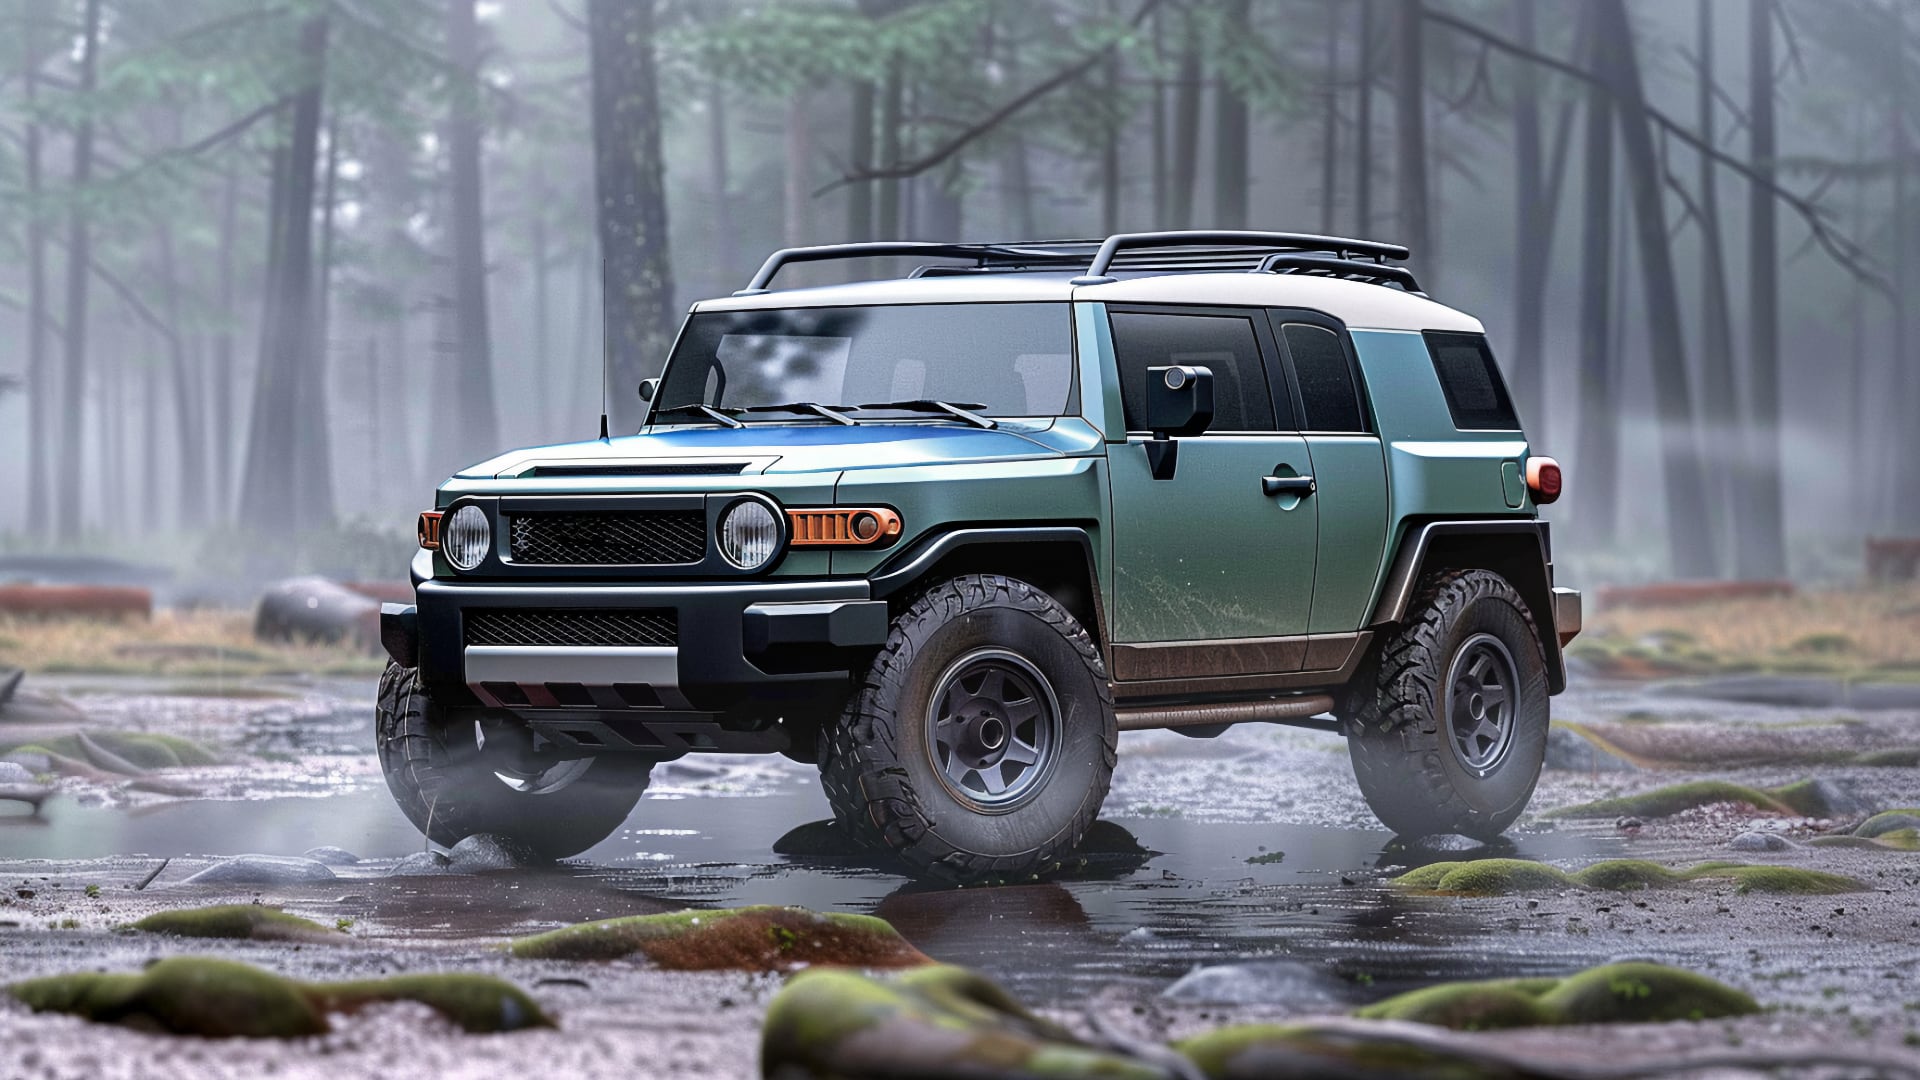 A green Toyota FJ Cruiser, from one of the years to avoid, is driving through a forest.